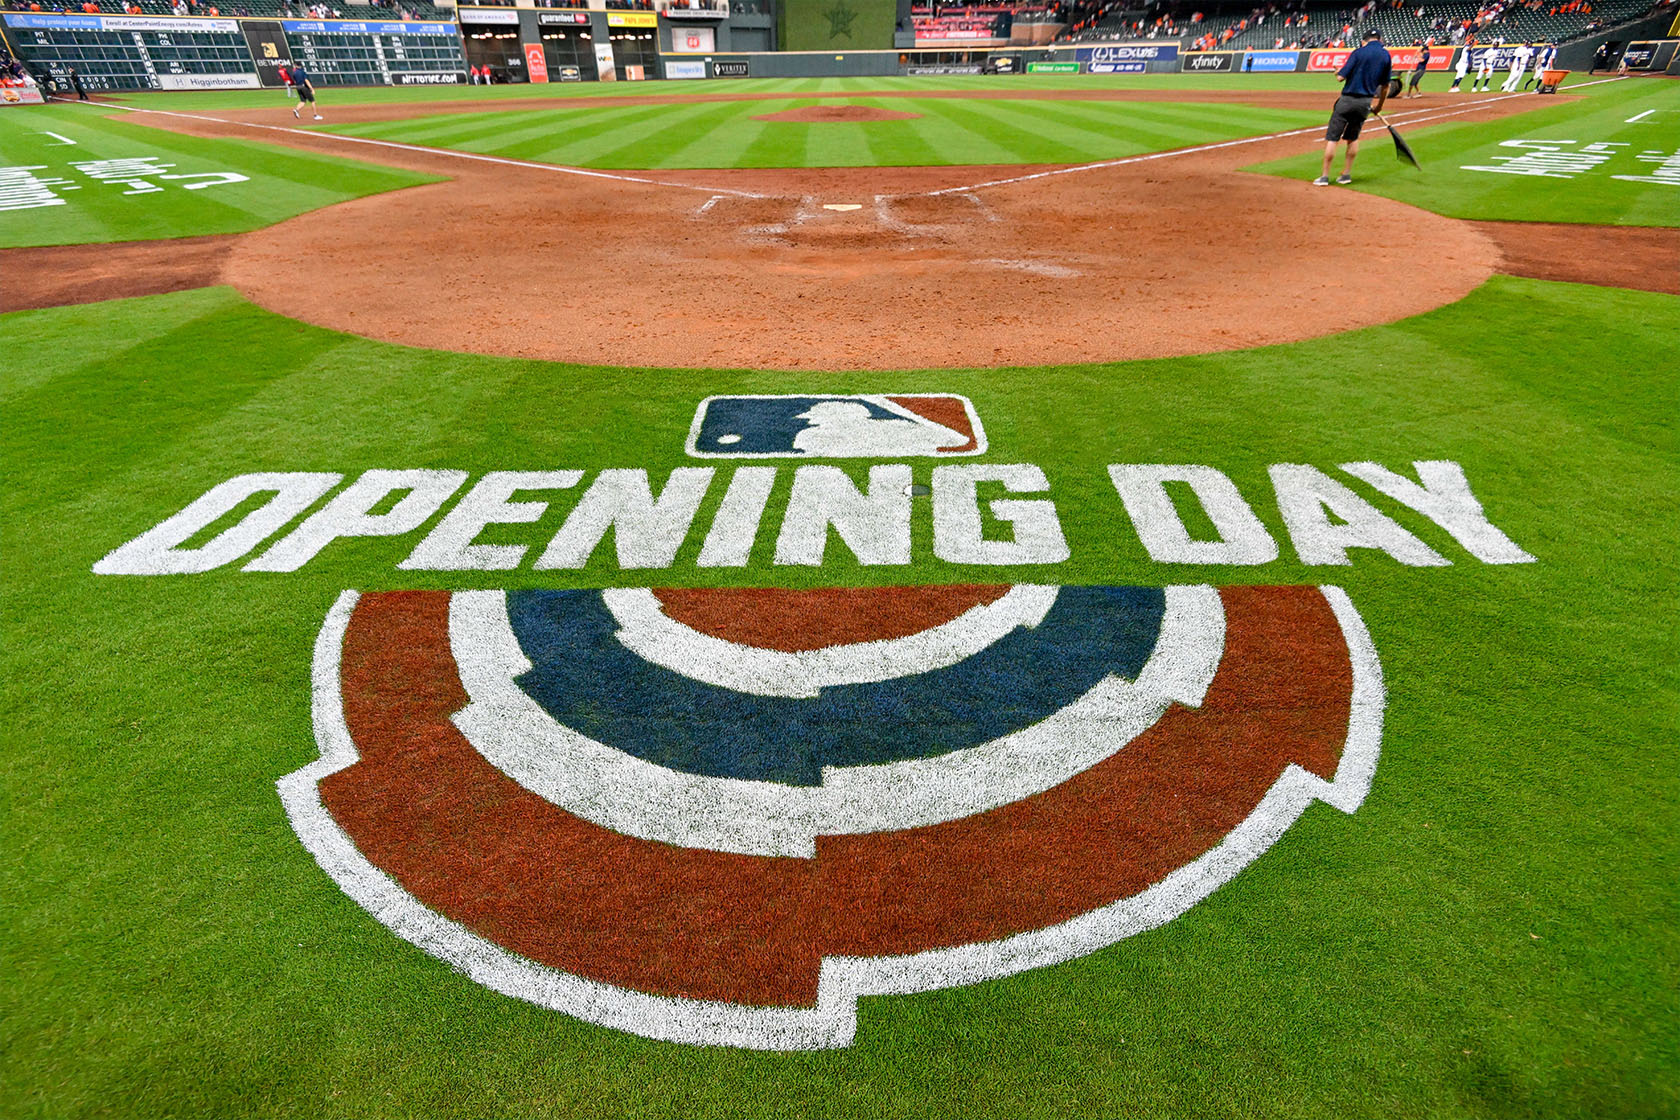 Astros vs White Sox Opening day tickets are still available